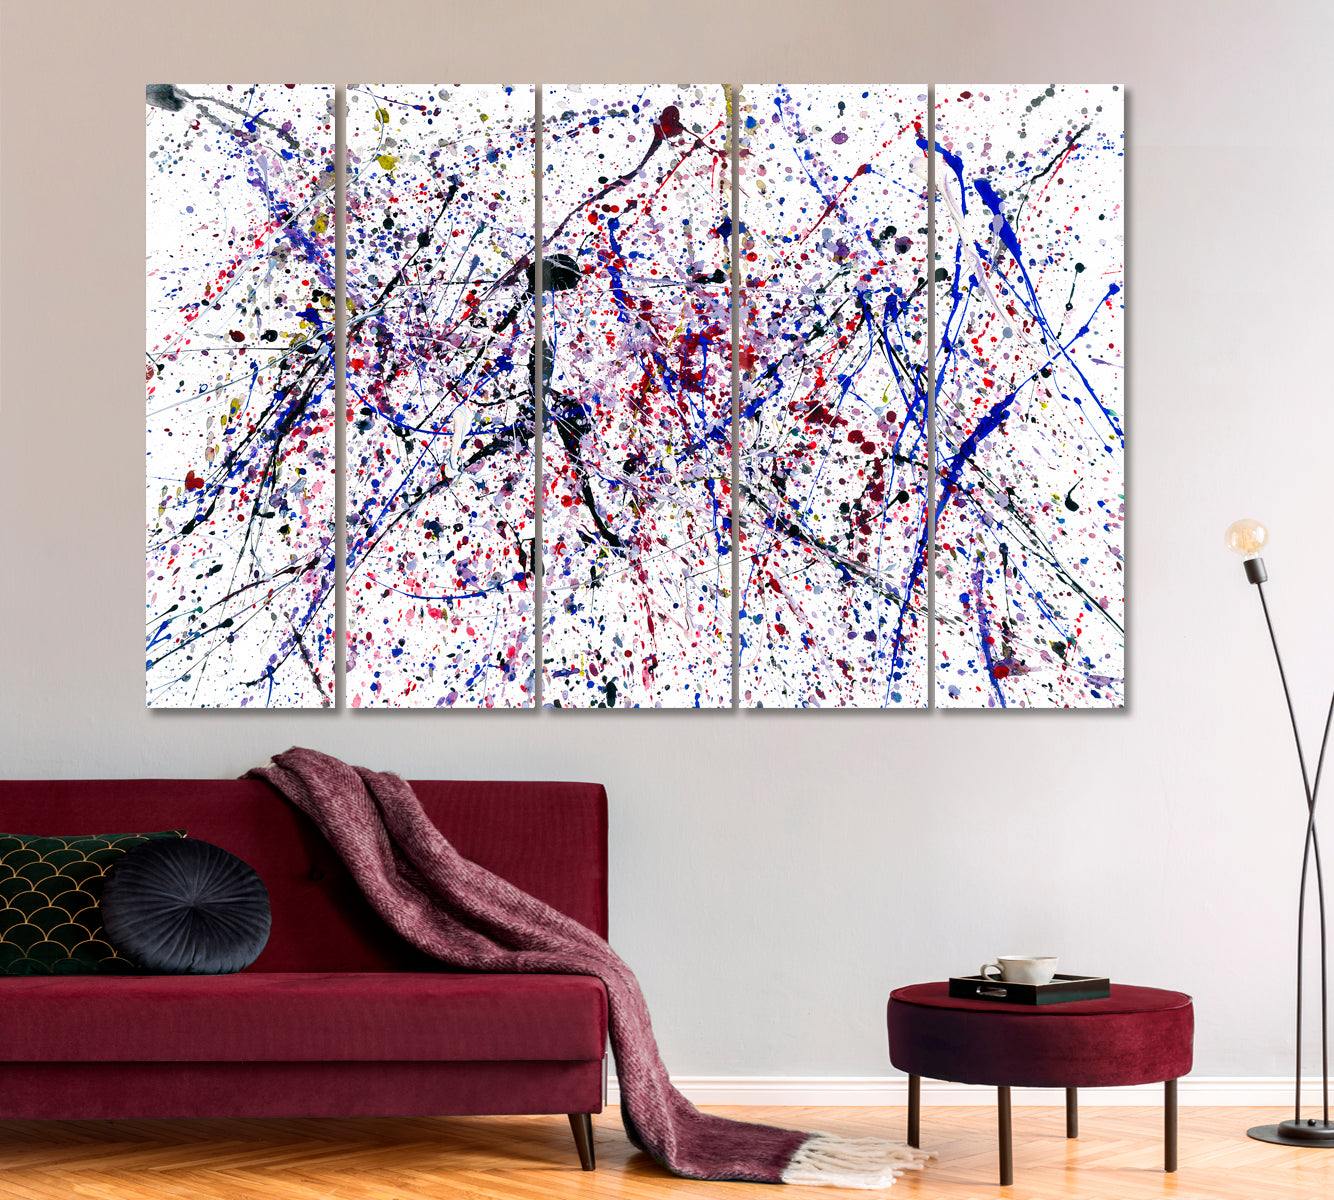 Colorful Modern Expressionist Abstract Drip Art Contemporary Art Artesty 5 panels 36" x 24" 